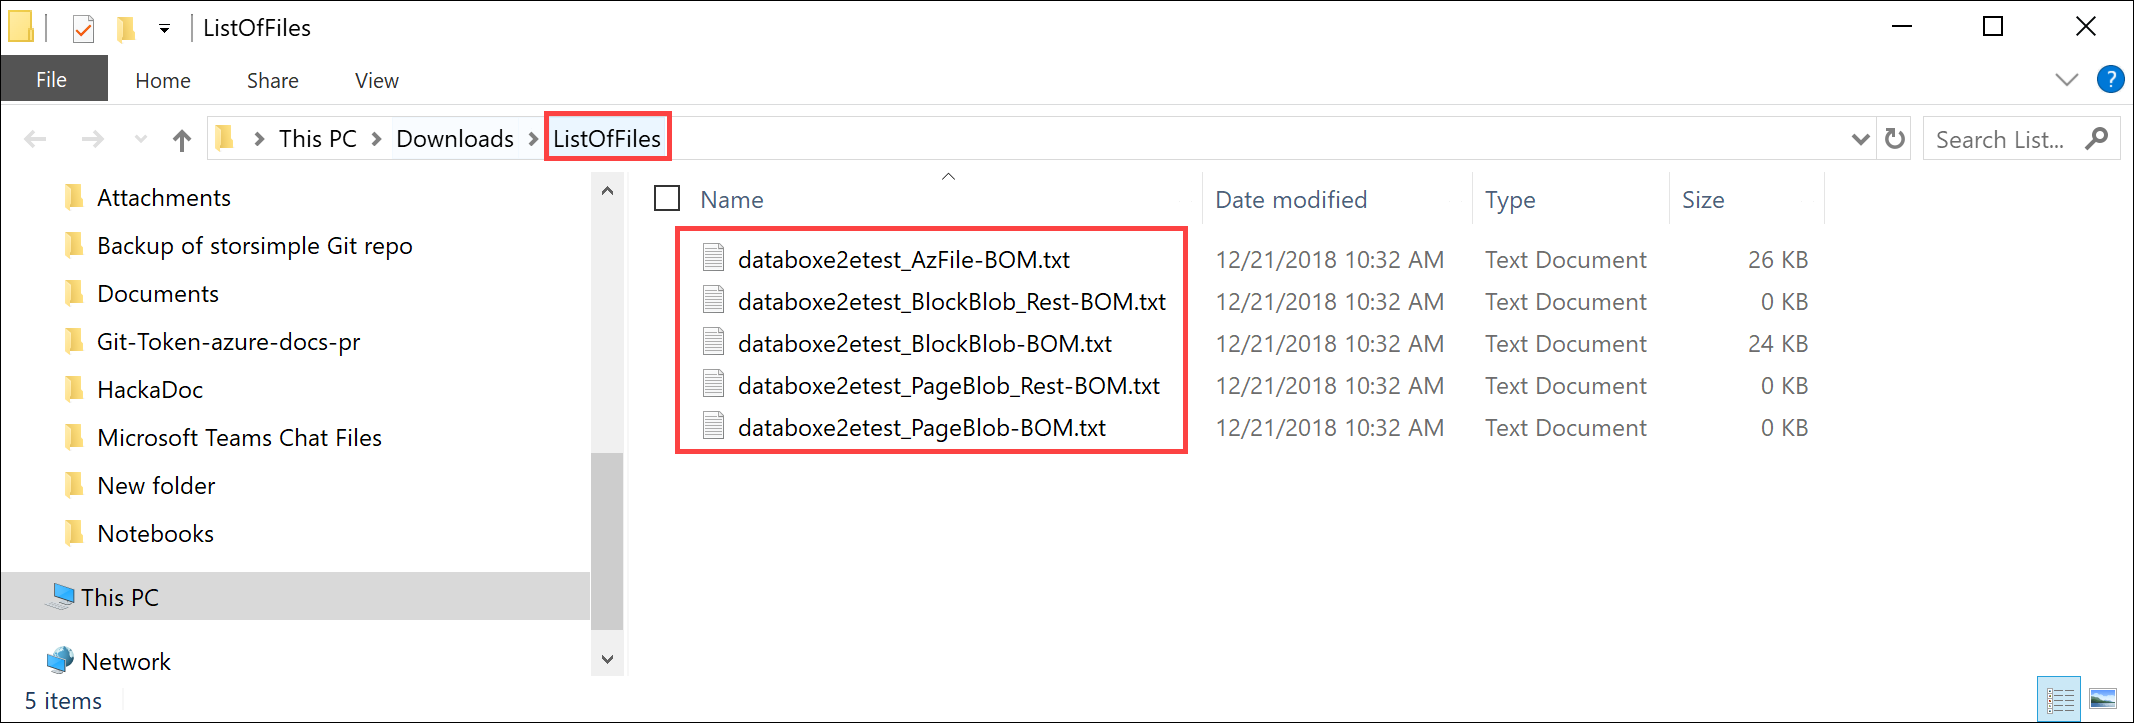 Download list of files or BOM files